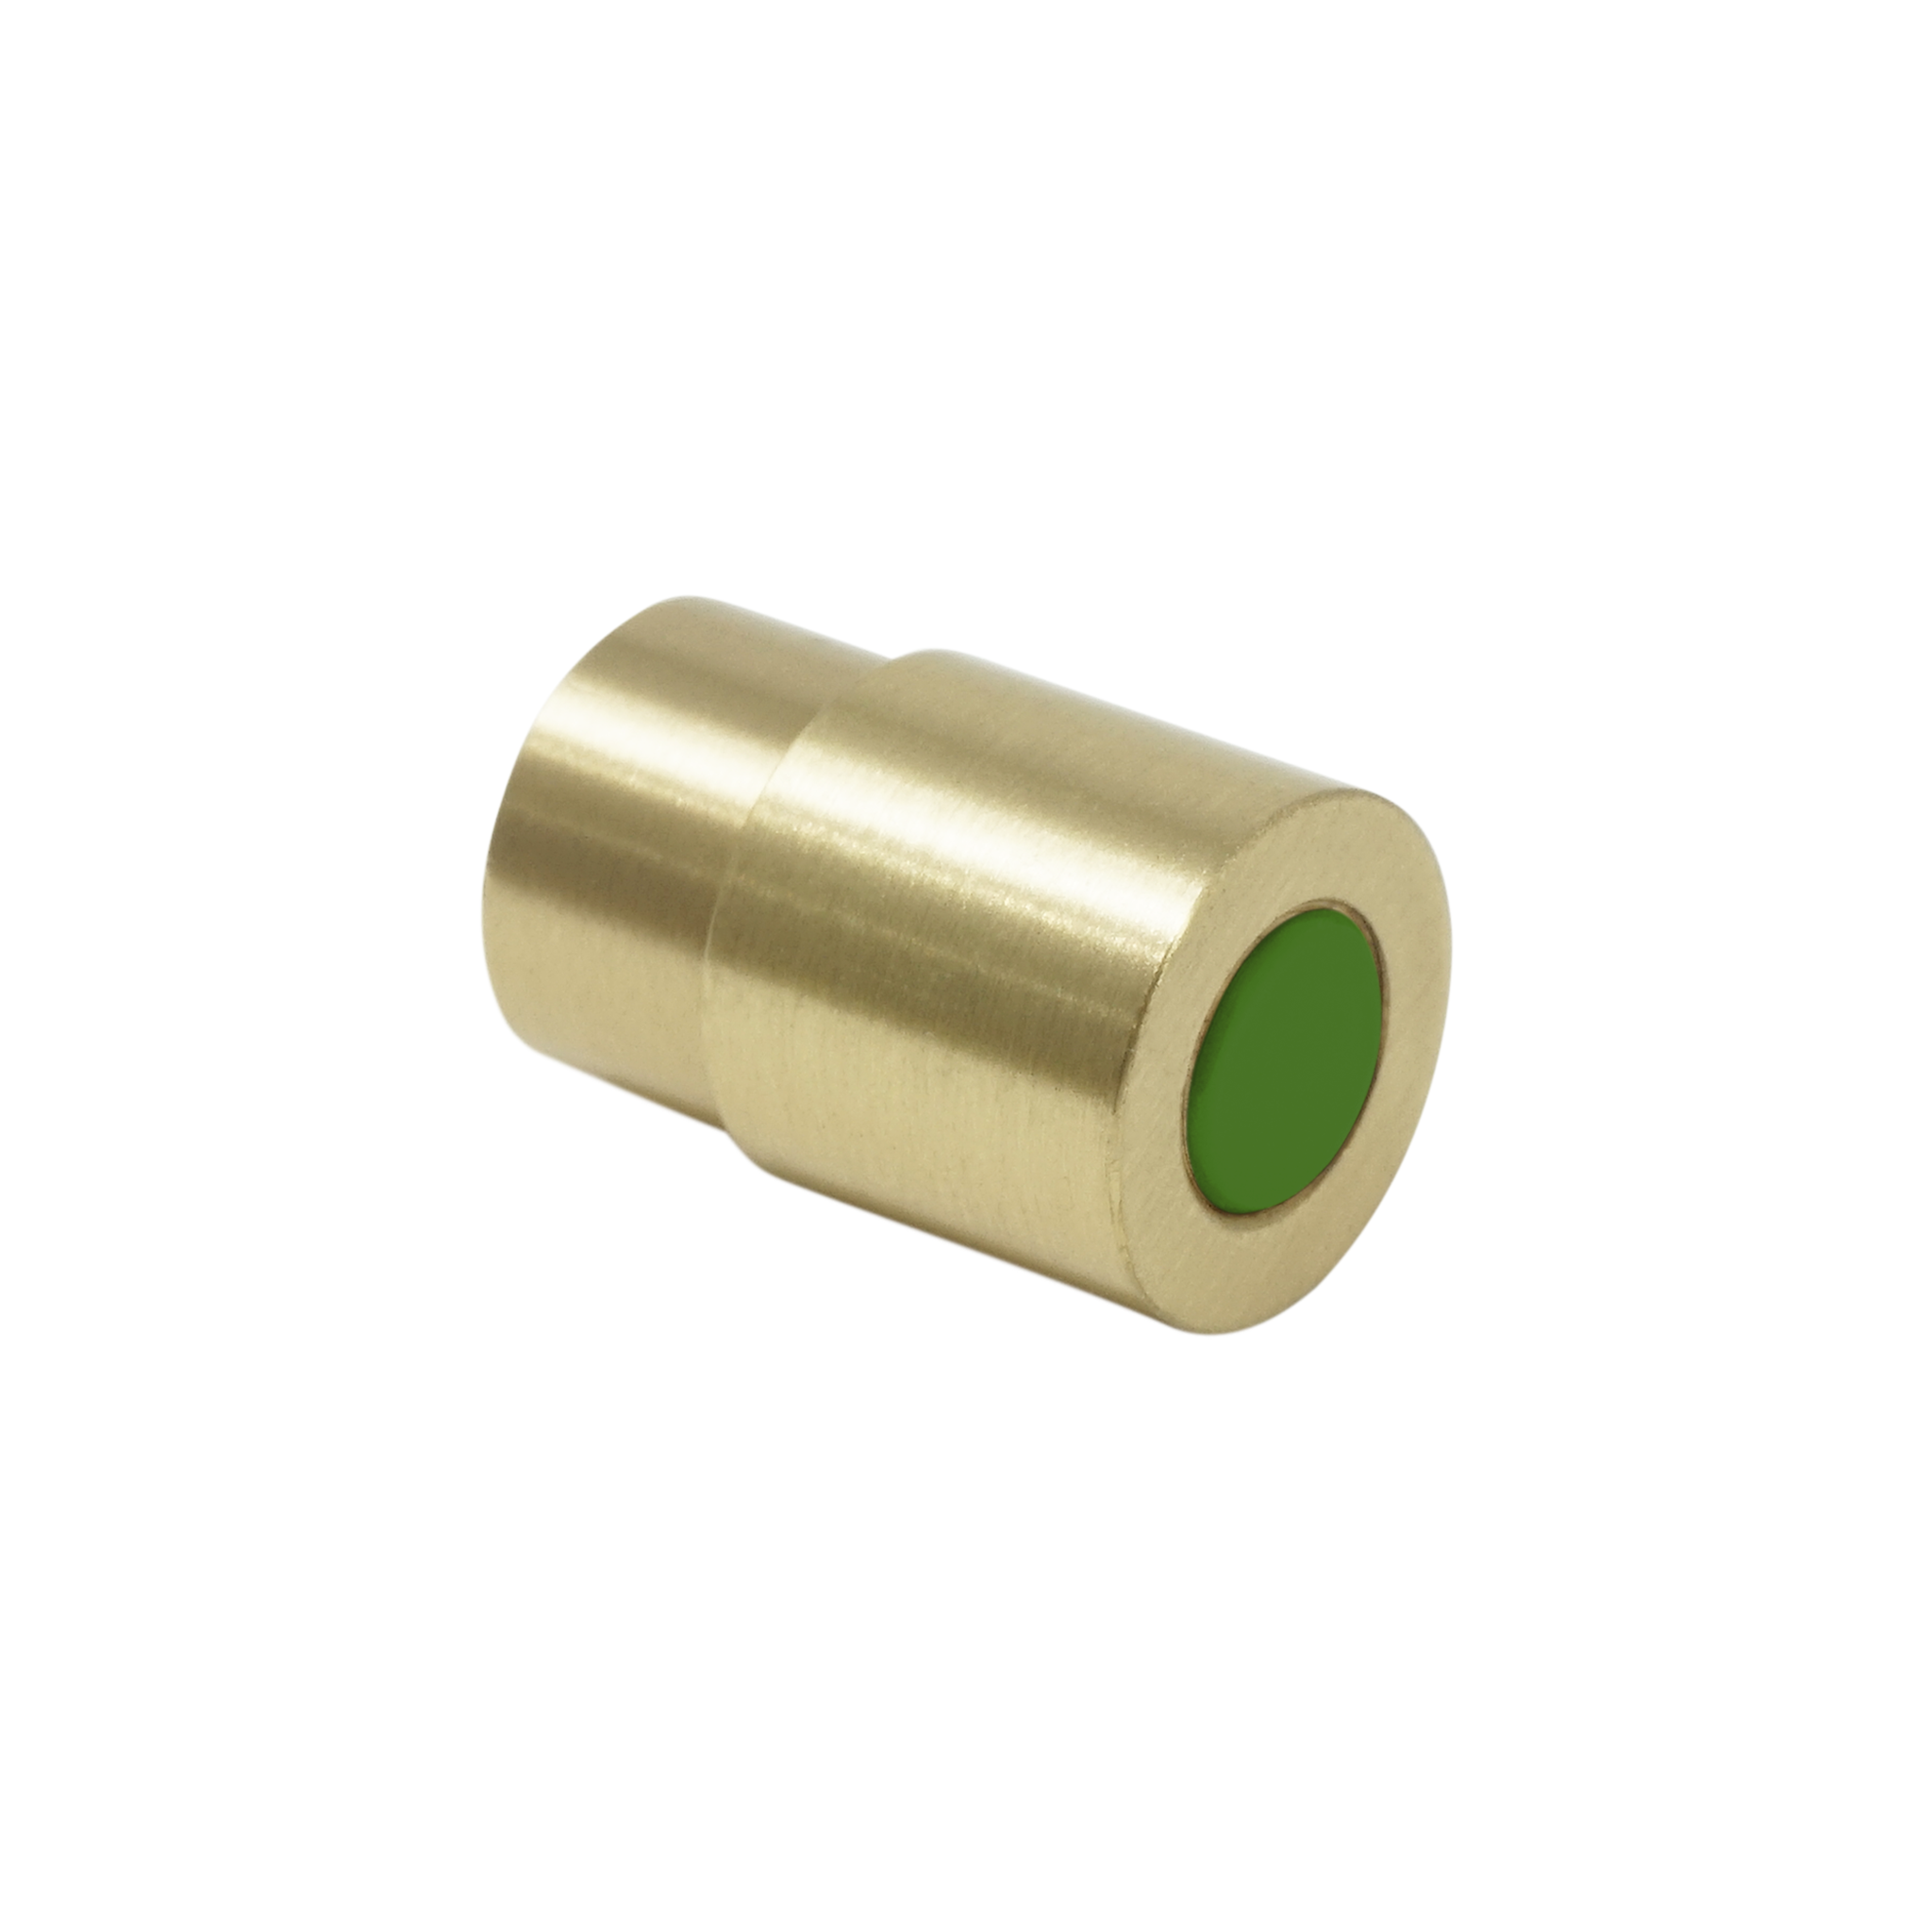 Brass and python green color Head knob Dutton Brown hardware